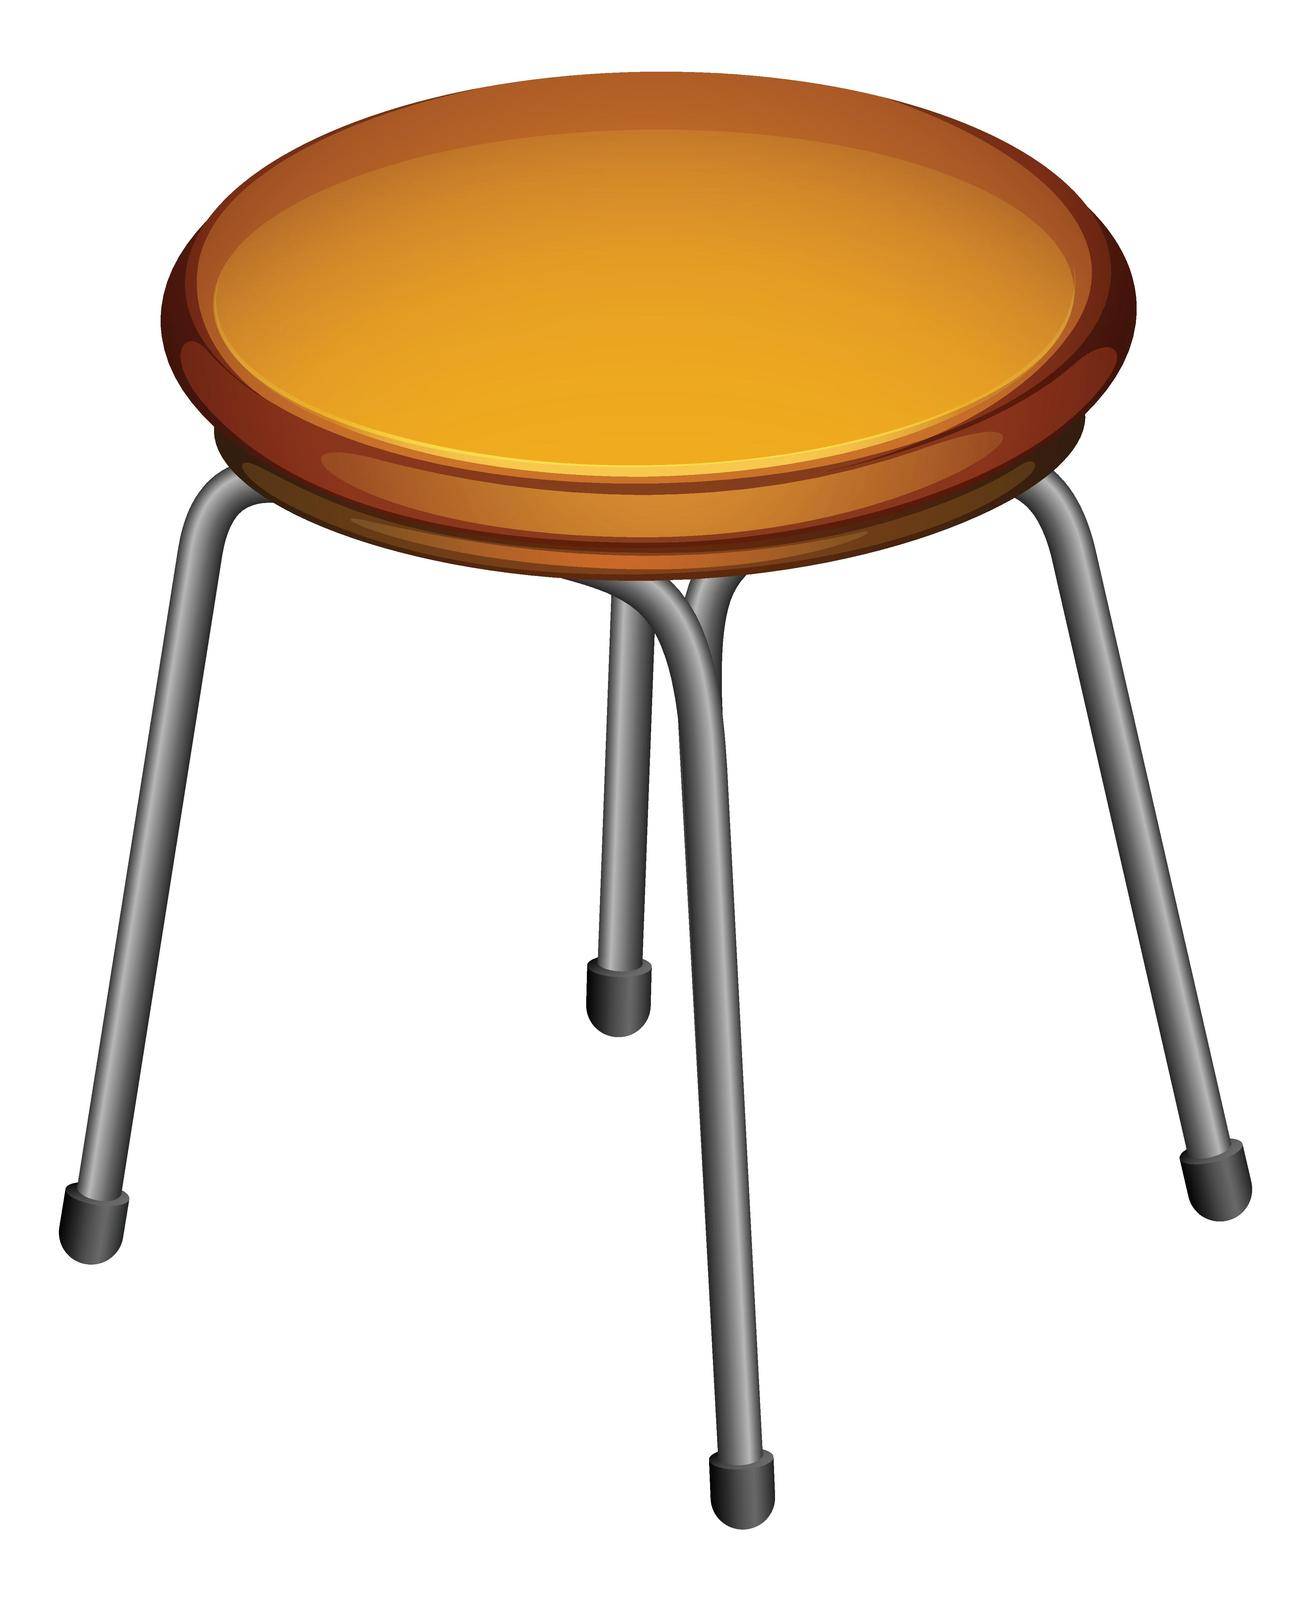 Illustration of a chair on a white background